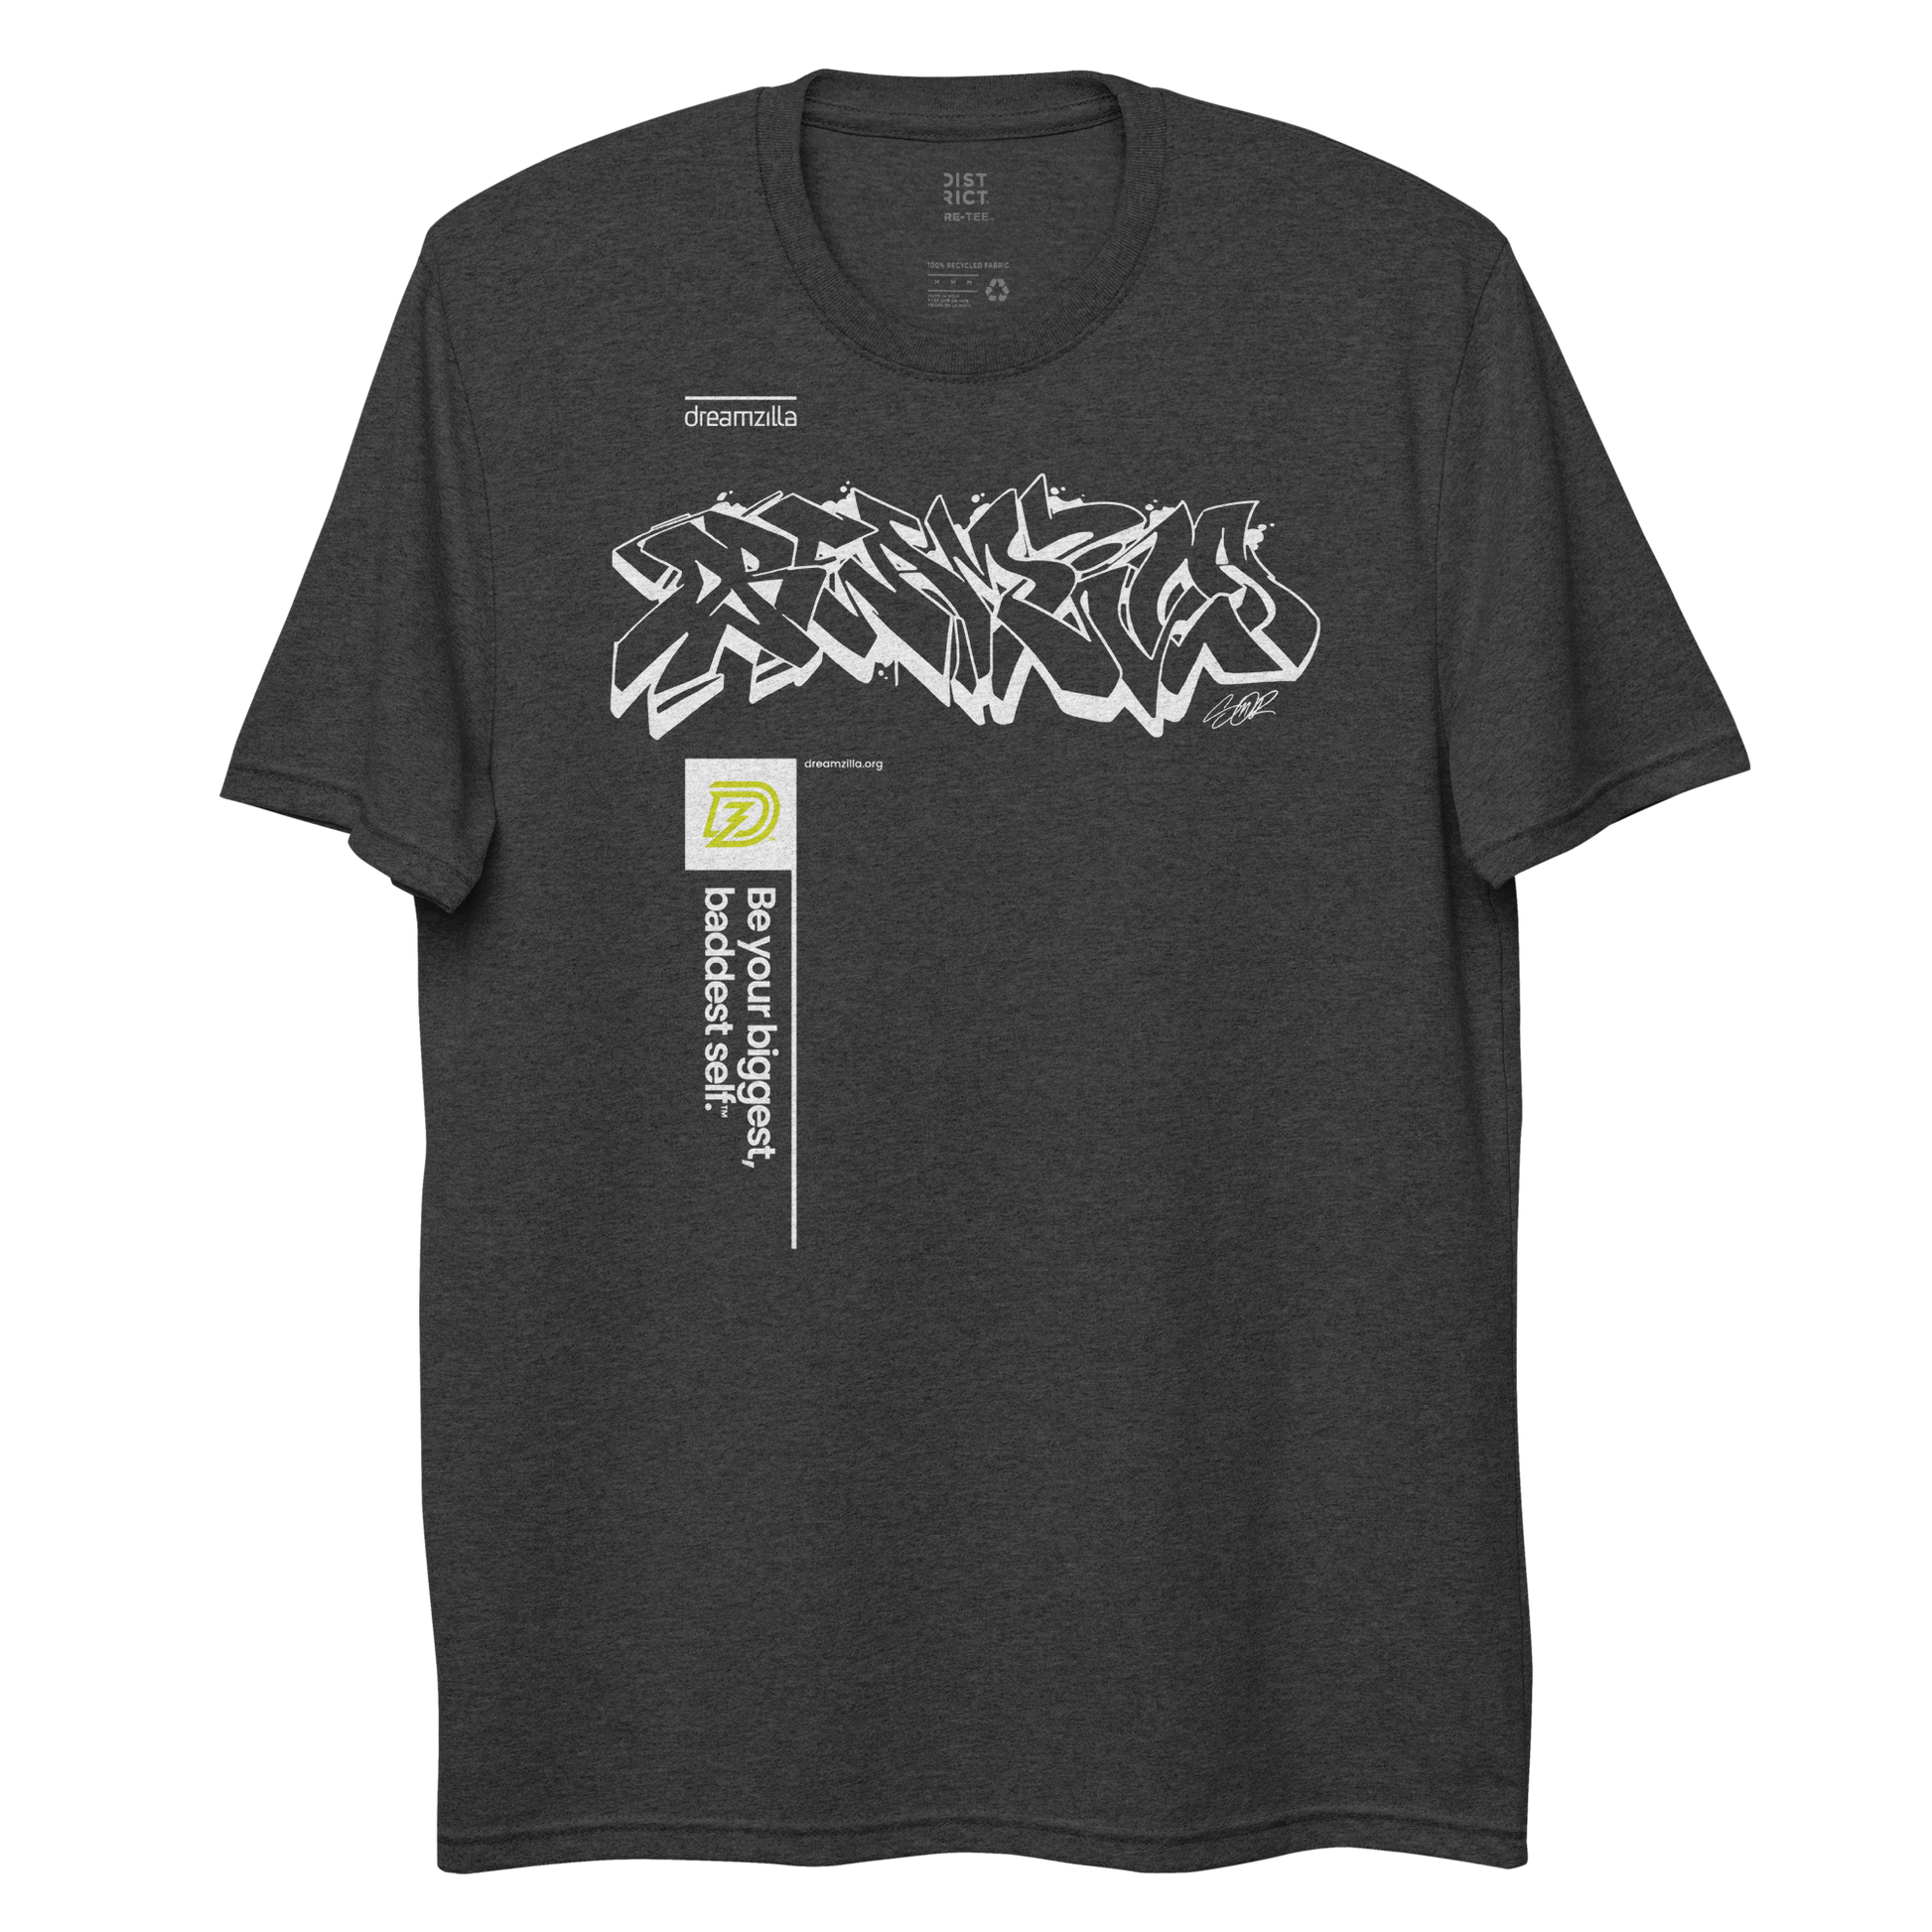 Graffiti Wildstyle by Sanitor ByBBS Unisex Recycled Short Sleeve Tee in Charcoal Heather